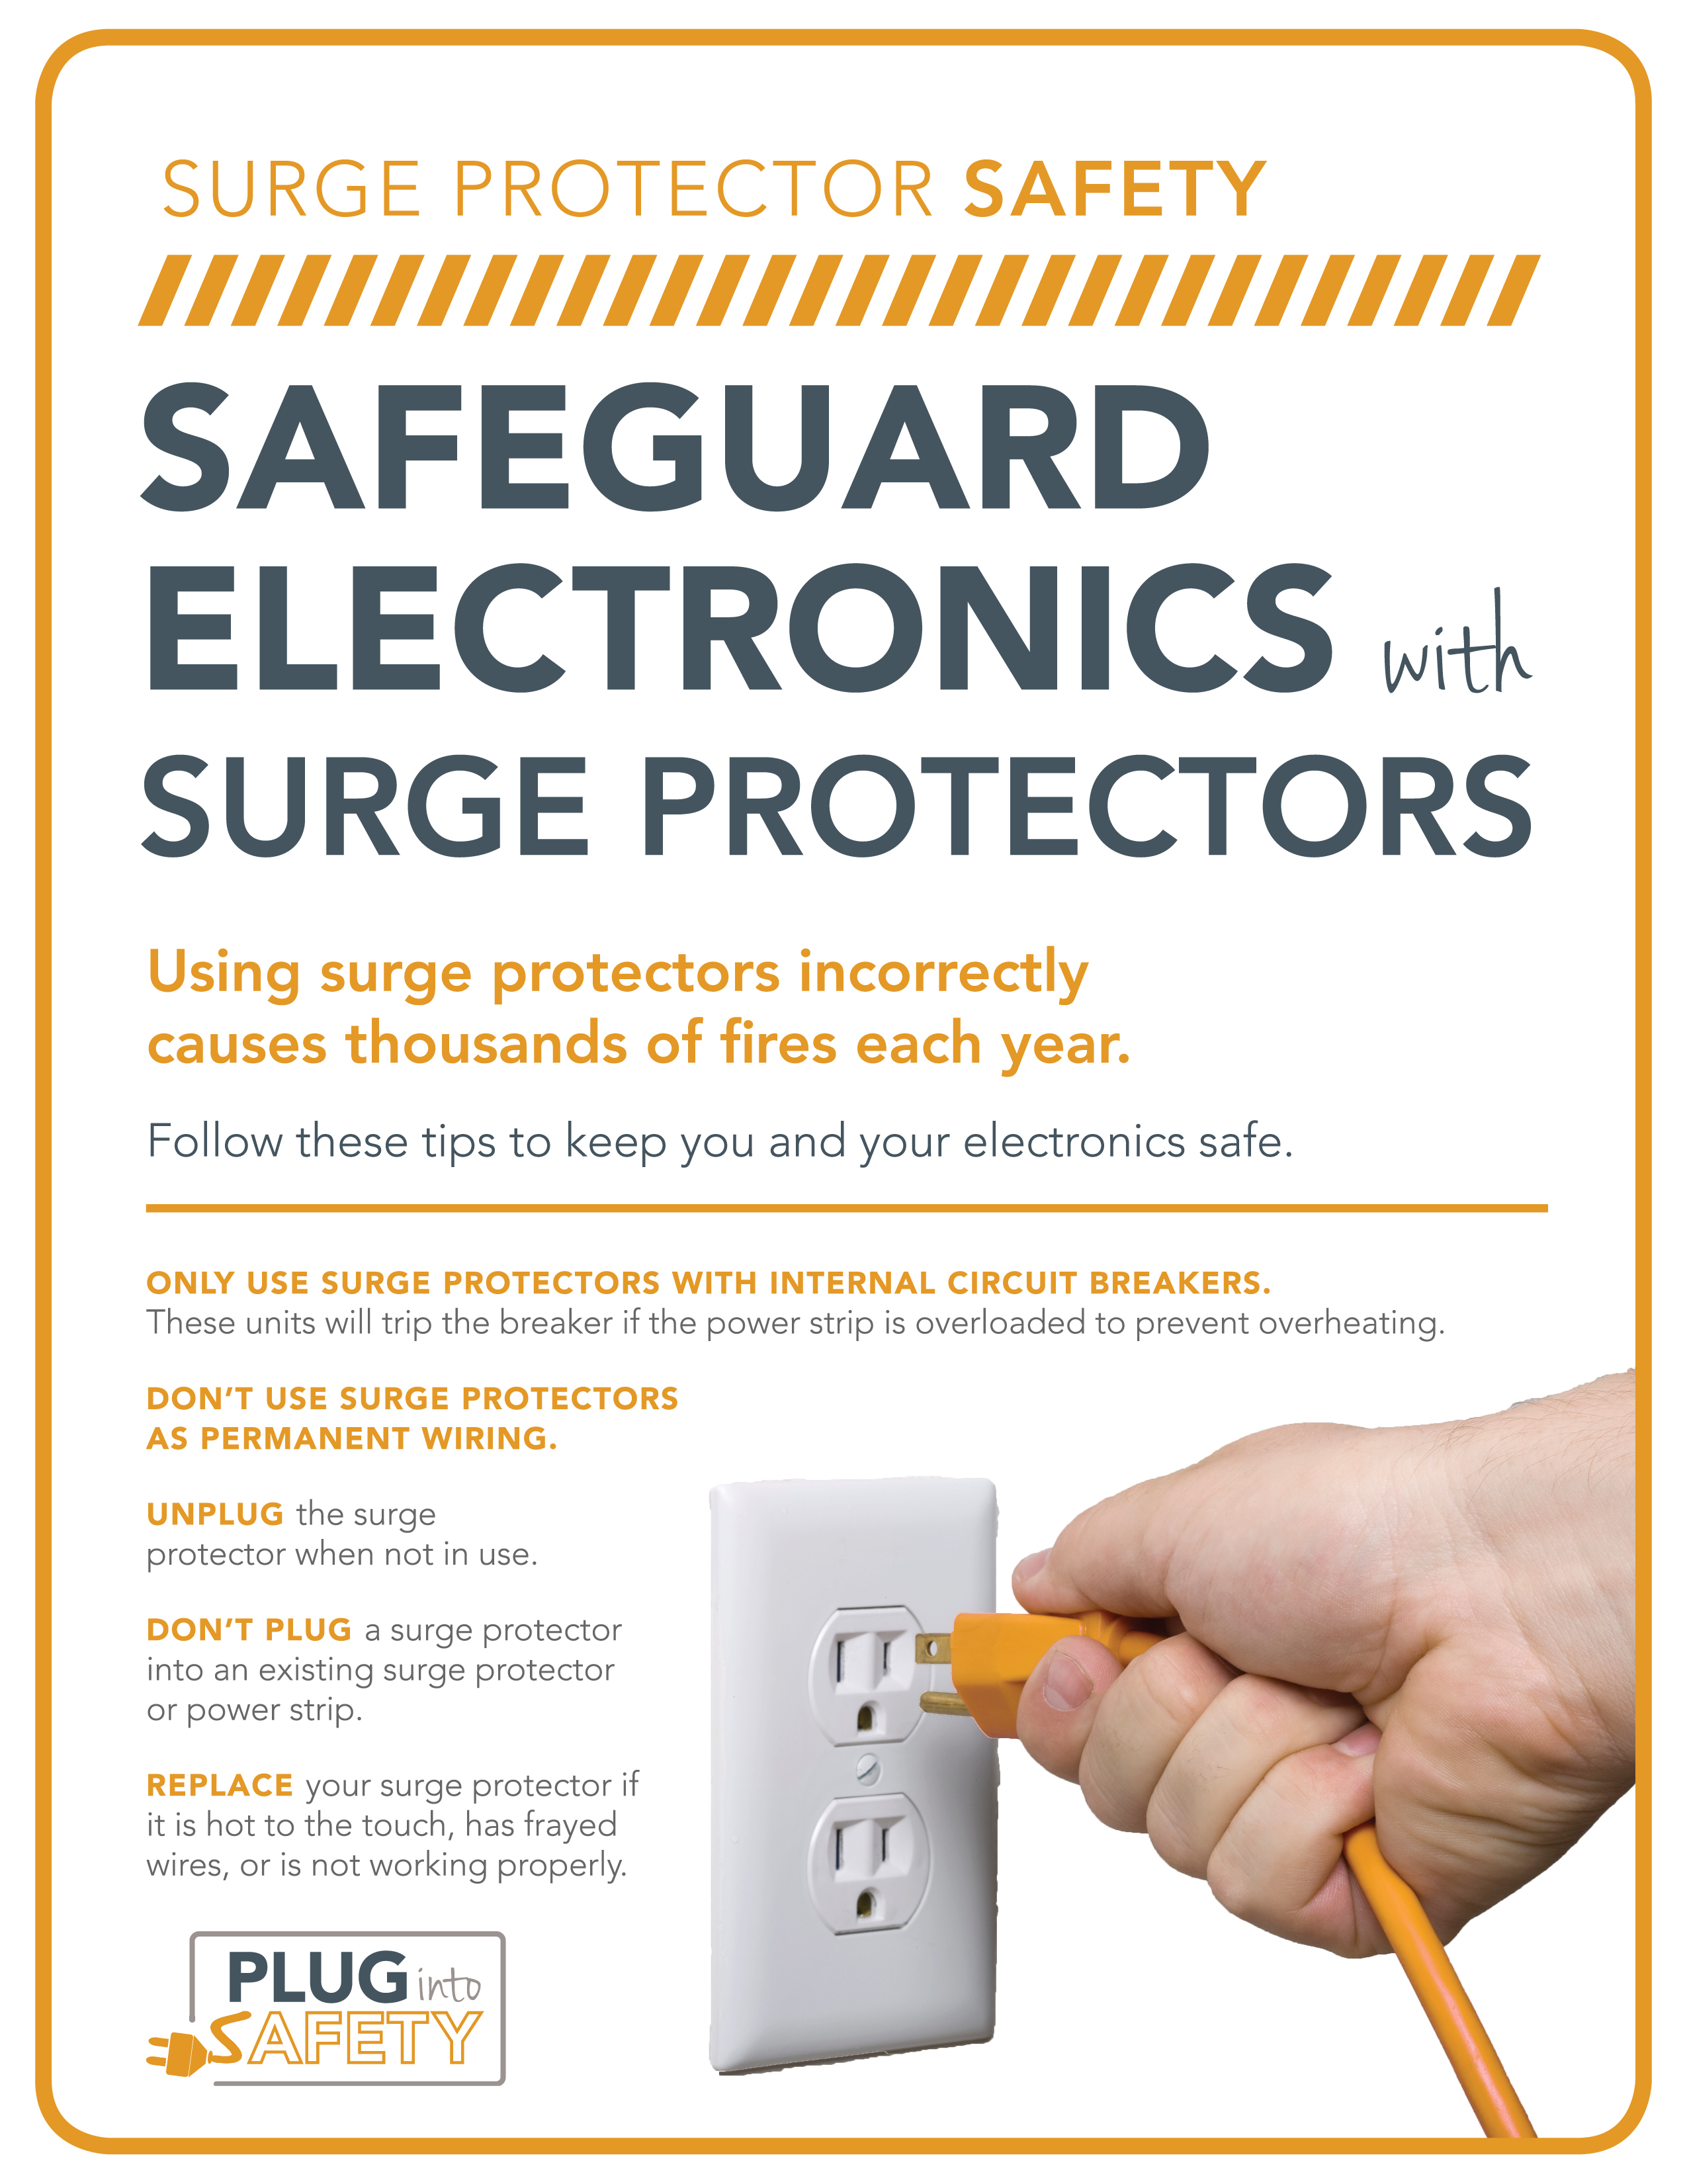 The Do's and Don'ts of Using Surge Protectors